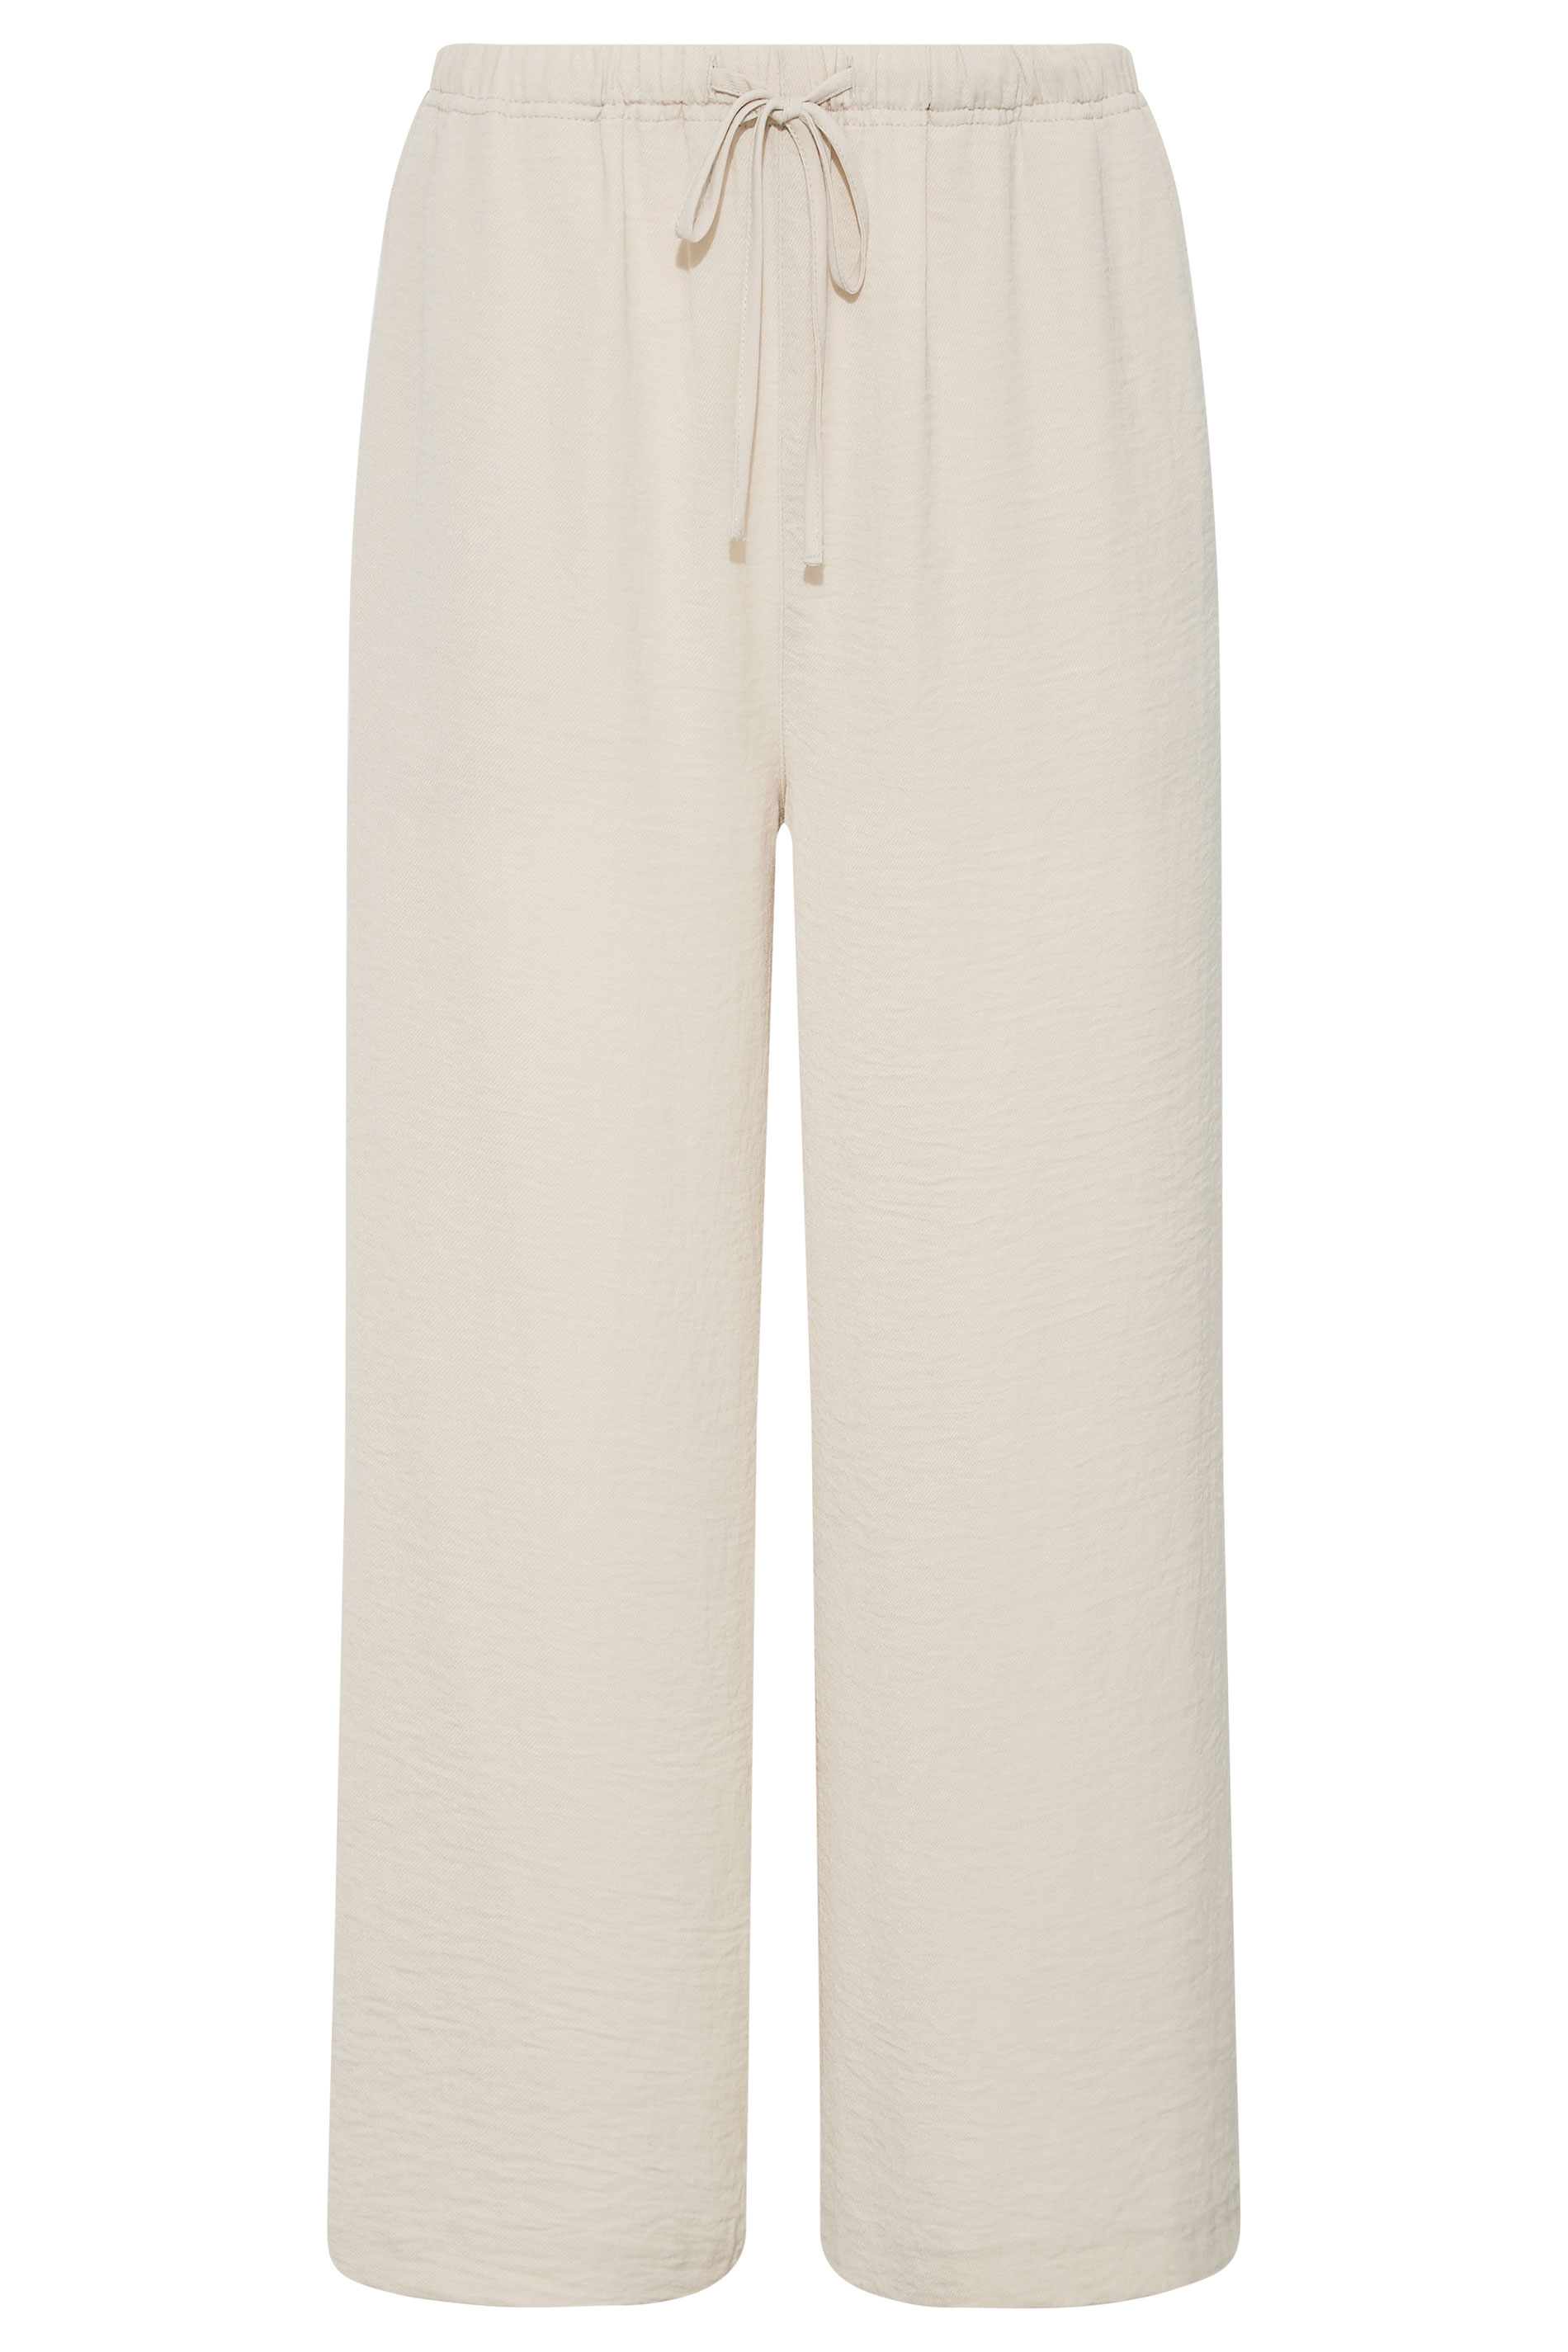 Loewe Cropped Trousers Cotton Silk  LABELS